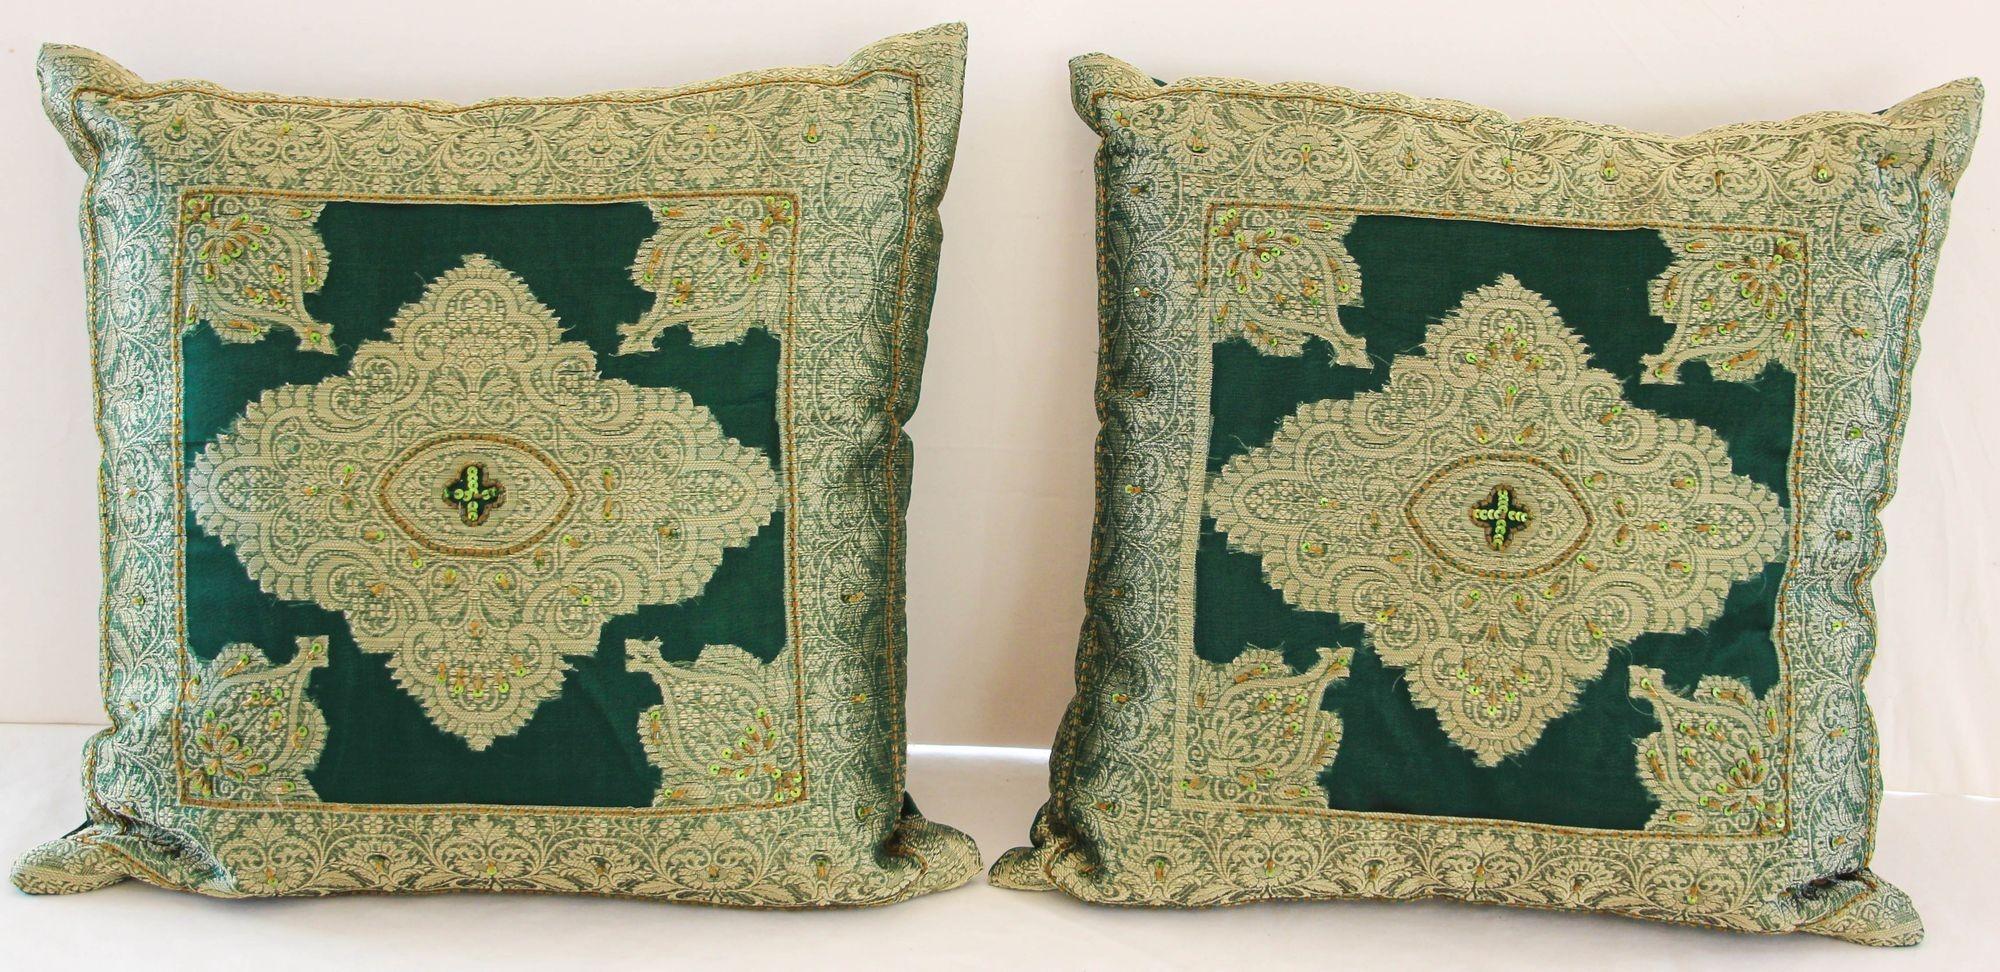 Emerald Green Moorish Throw Pillows Embellished with Sequins and Beads a Pair For Sale 6